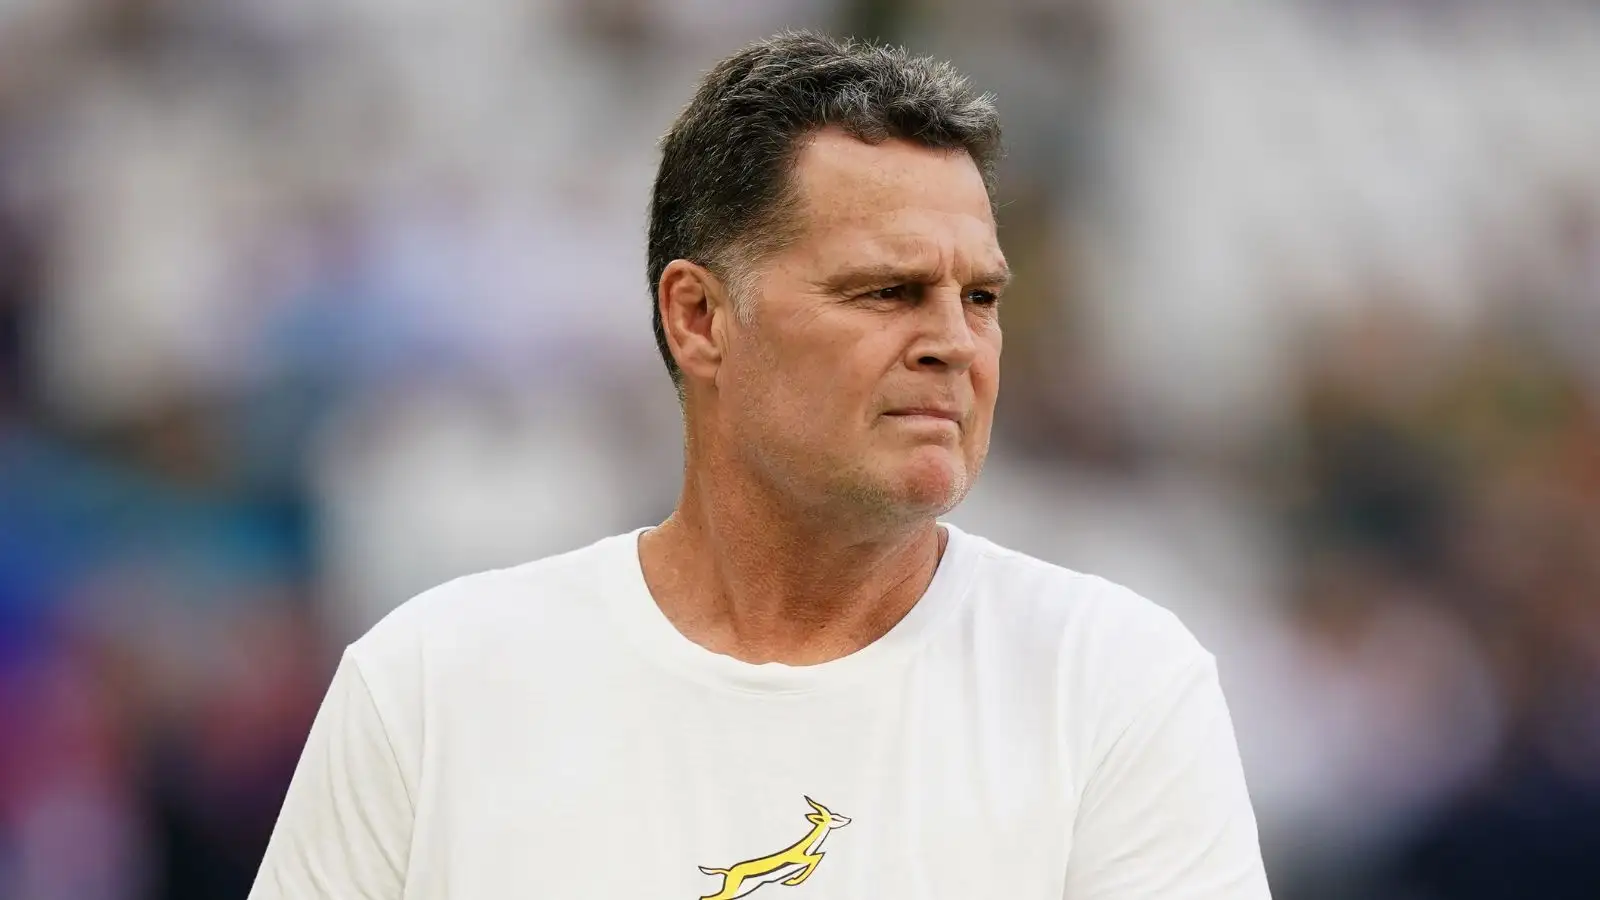 South Africa director of rugby Rassie Erasmus before the 2023 Rugby World Cup Pool B match at the Stade de Marseille, France. Picture date: Sunday September 10, 2023.